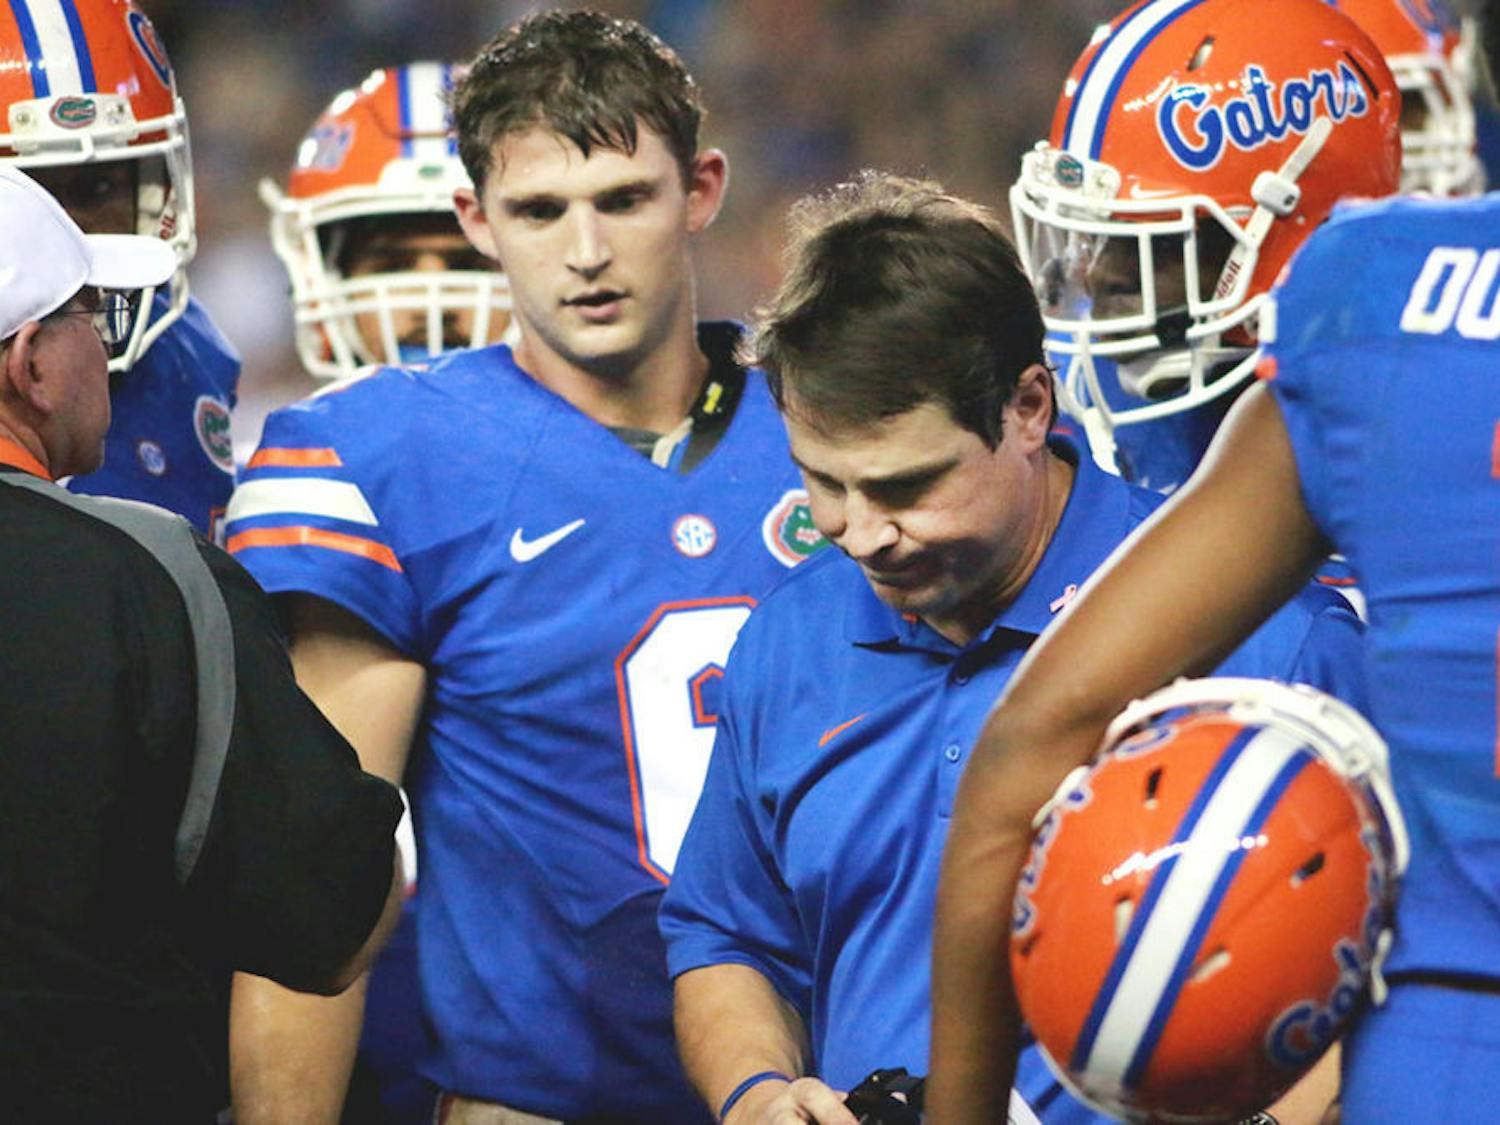 Florida head coach Will Muschamp turns away from a time-out talk with the Gators offense during Florida's 30-27 loss to LSU on Oct. 11 at Ben Hill Griffin Stadium.